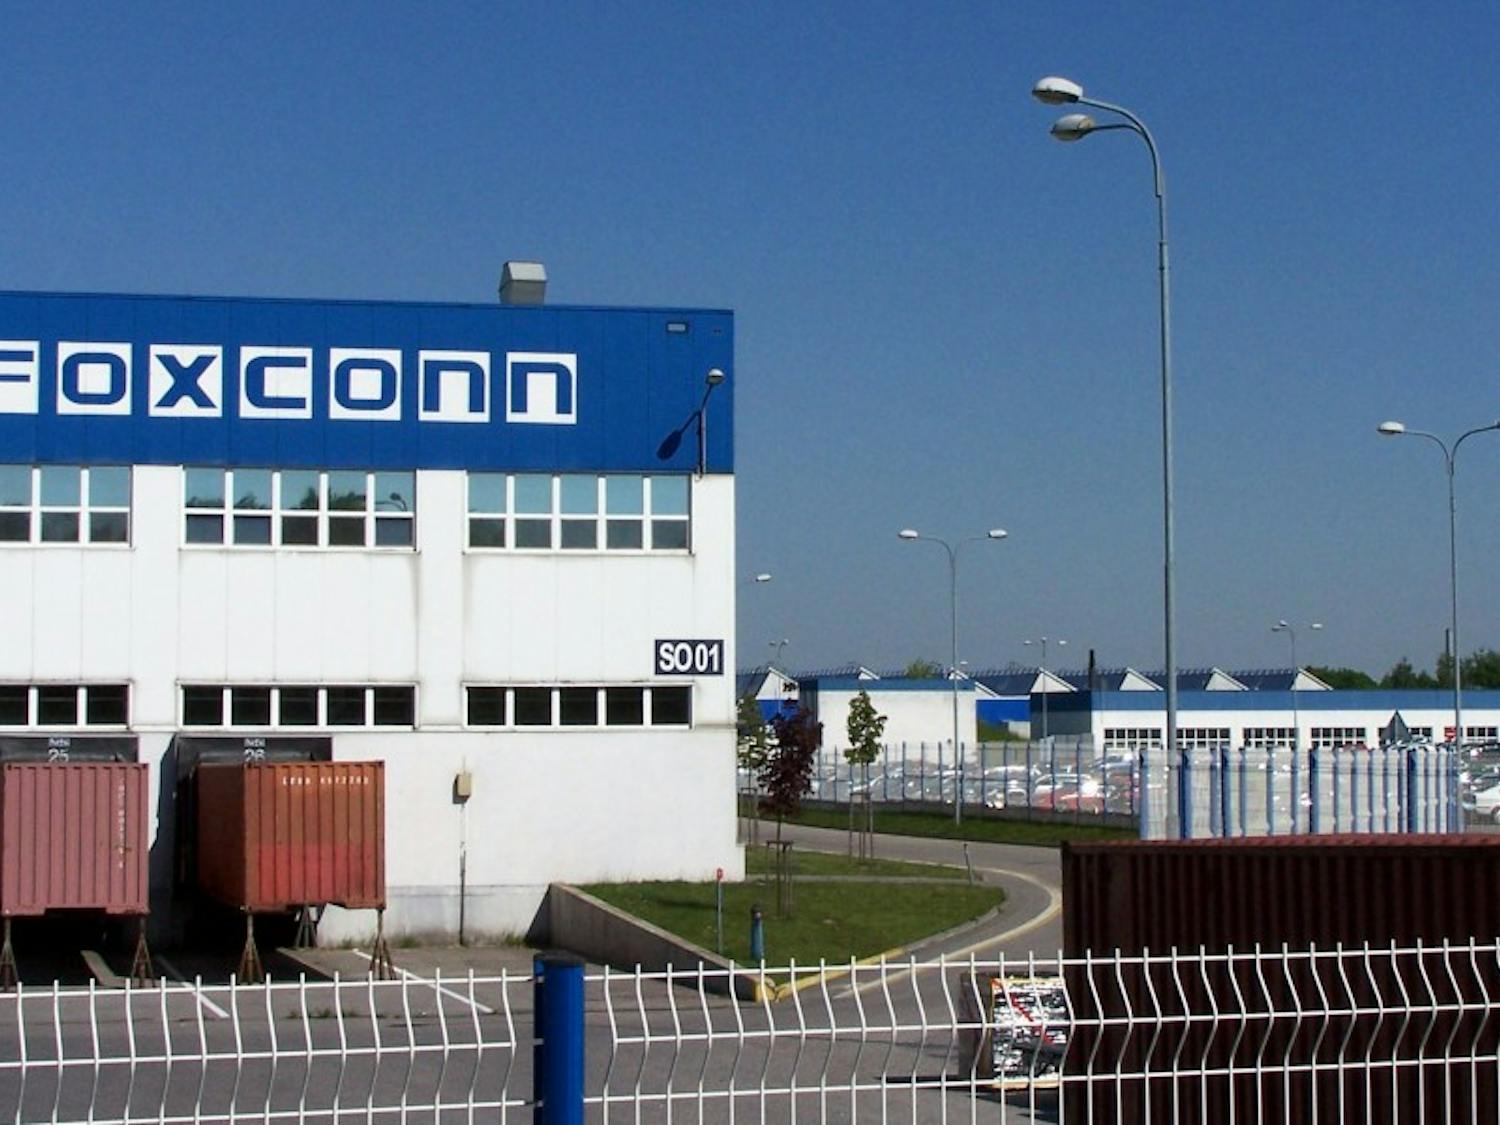 The State Senate approved the Foxconn bill Tuesday, moving it forward to the Assembly to take up on Thursday.